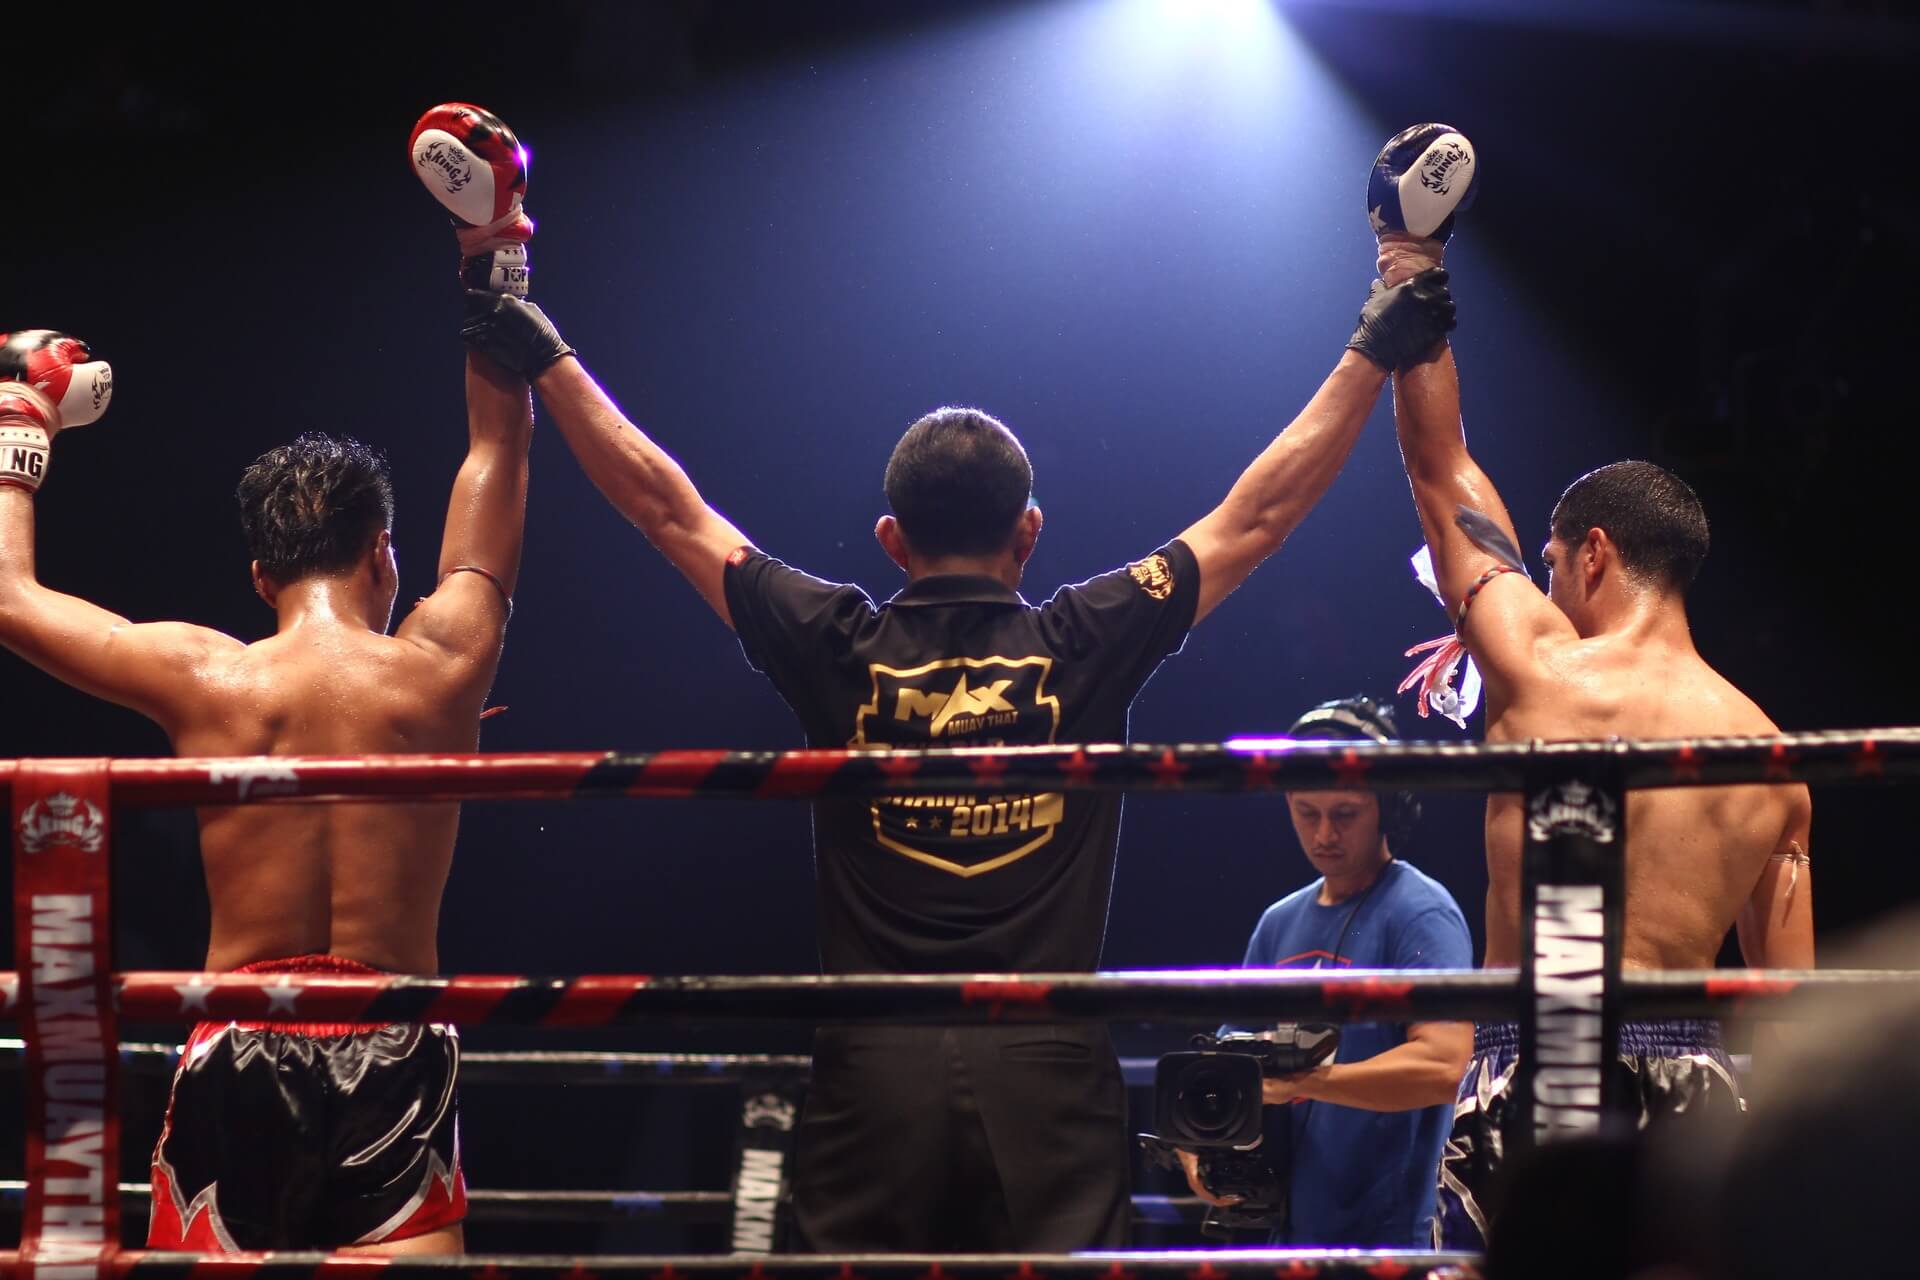 Muay Thai referee raising the hands of both fighters